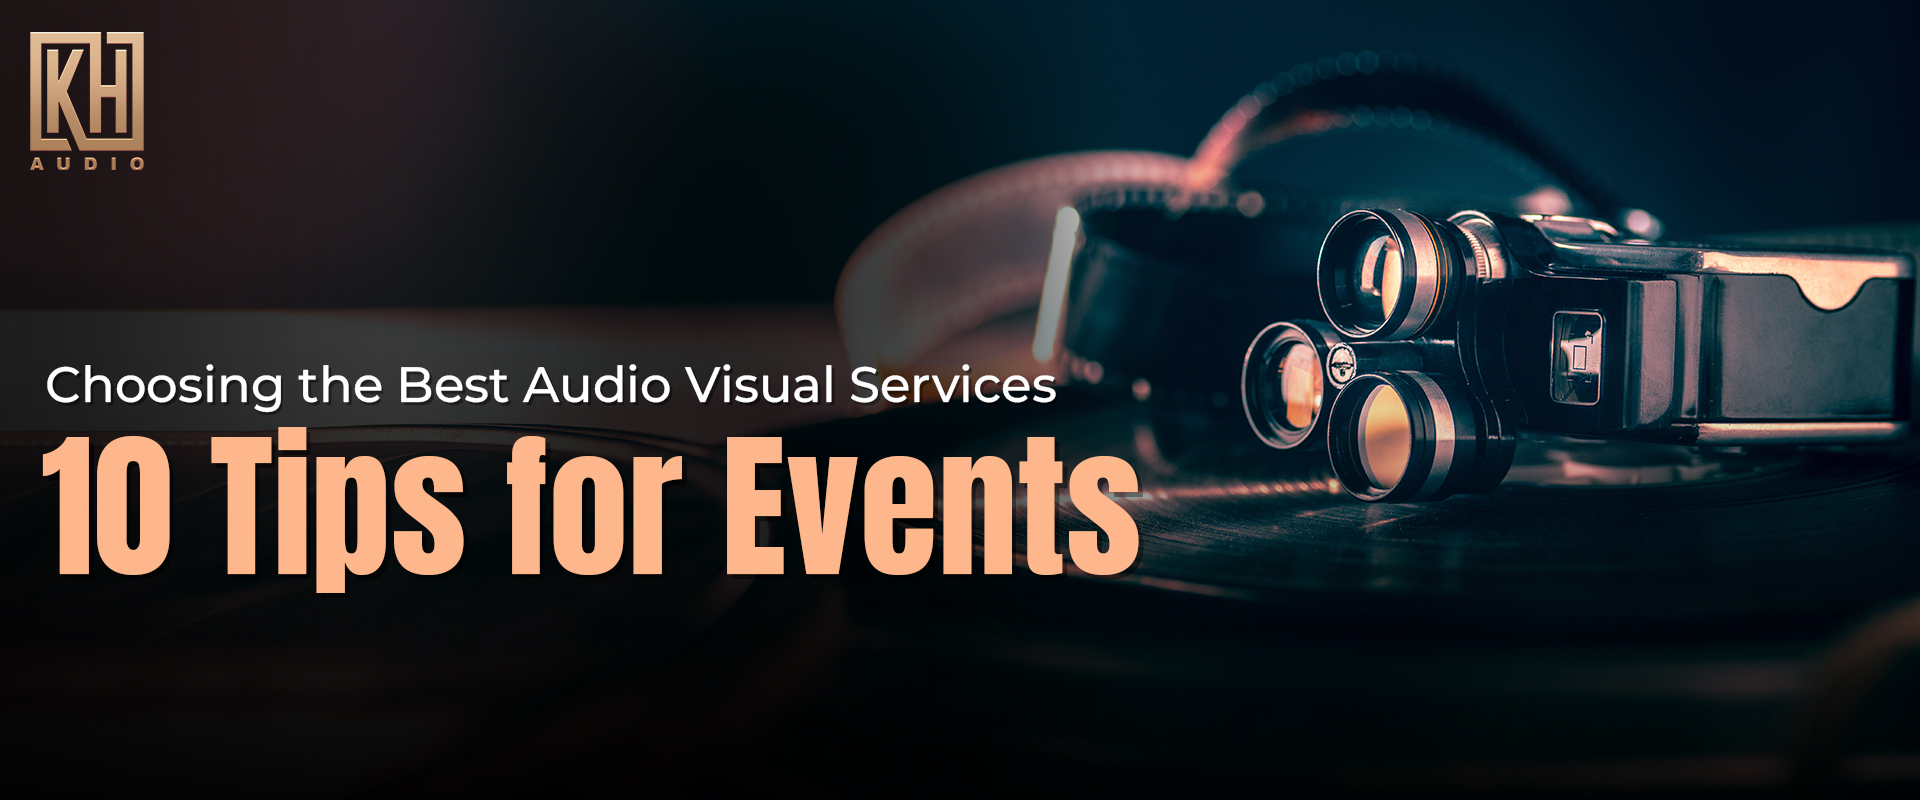 Choosing the Best Audio Visual Services: 10 Tips for Events